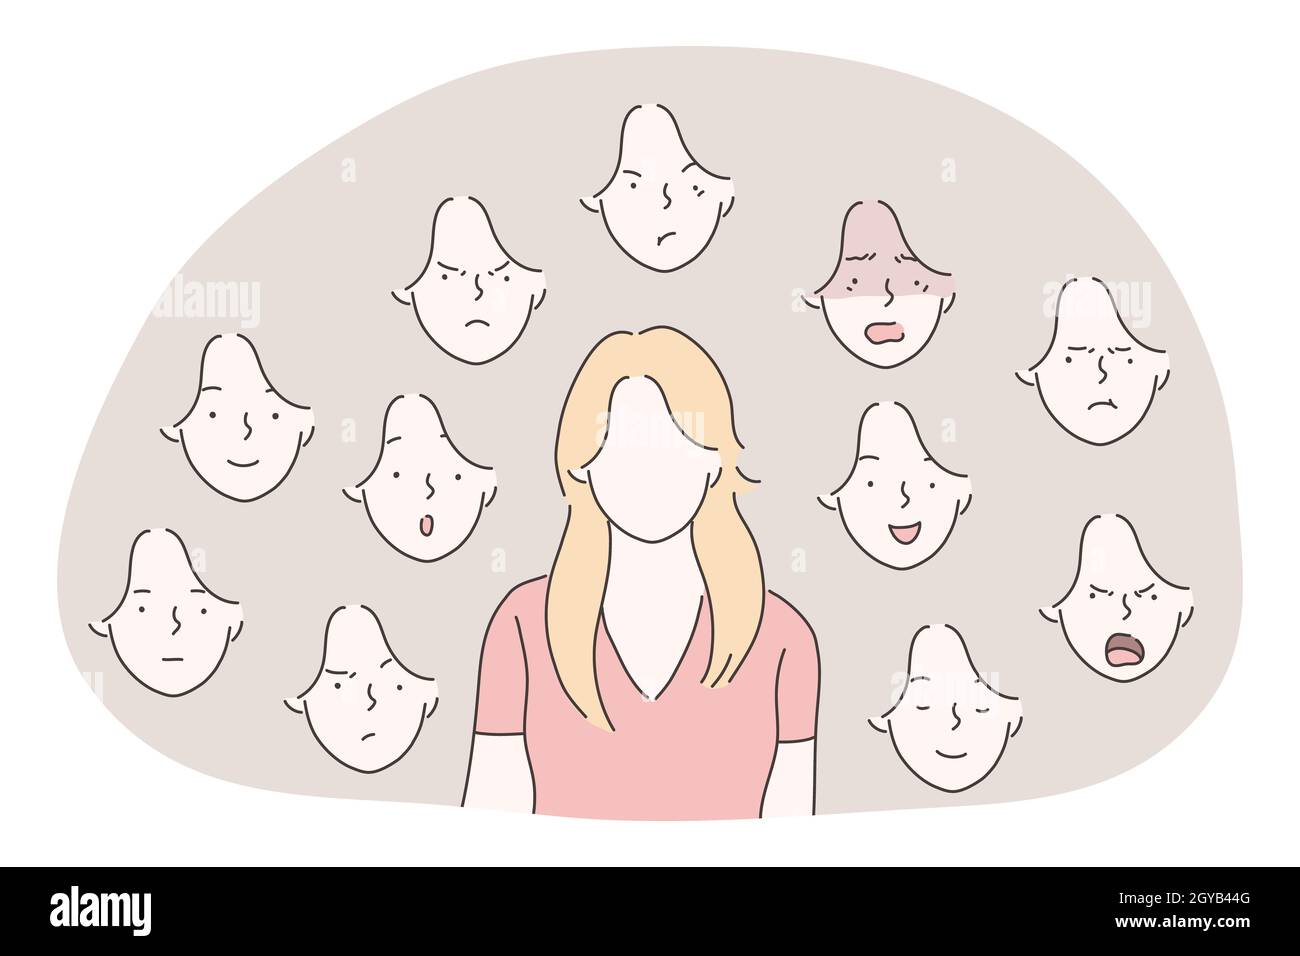 Variety of emotions and facial expressions concept. Young woman cartoon character with blank face and variety of different facial expressions from pos Stock Photo